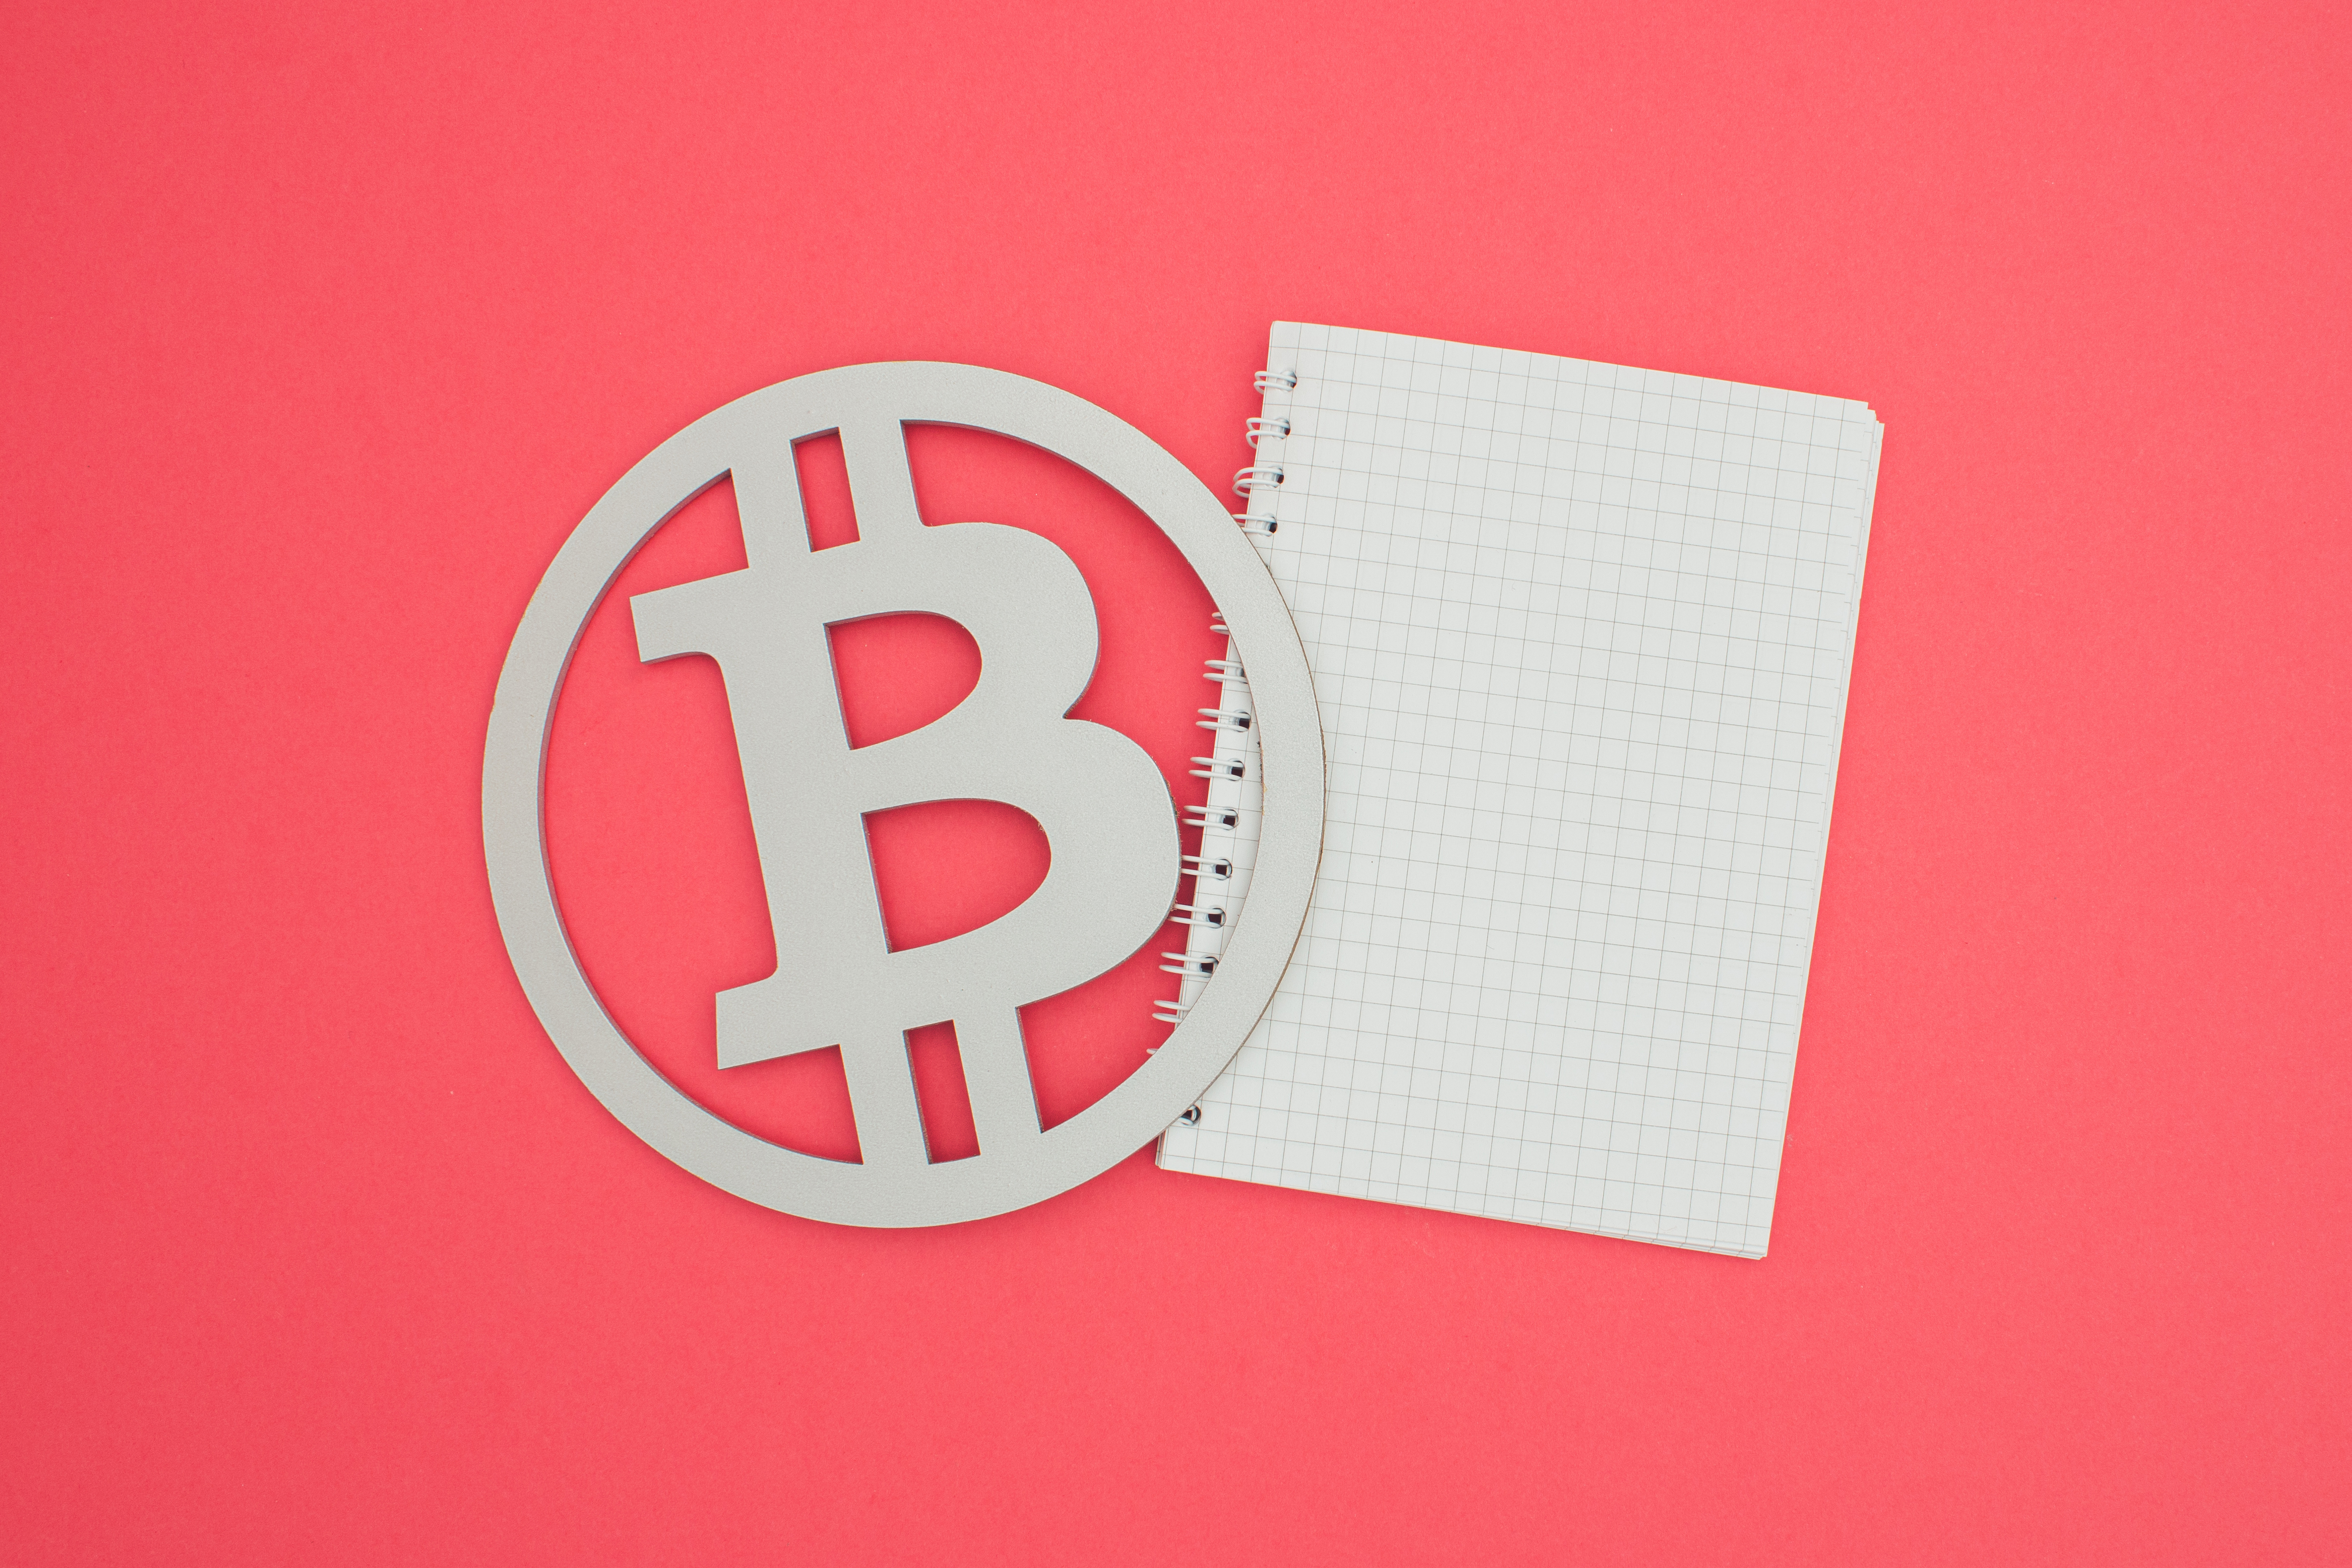 Image of a Bitcoin symbol and a white notebook against a salmon background.